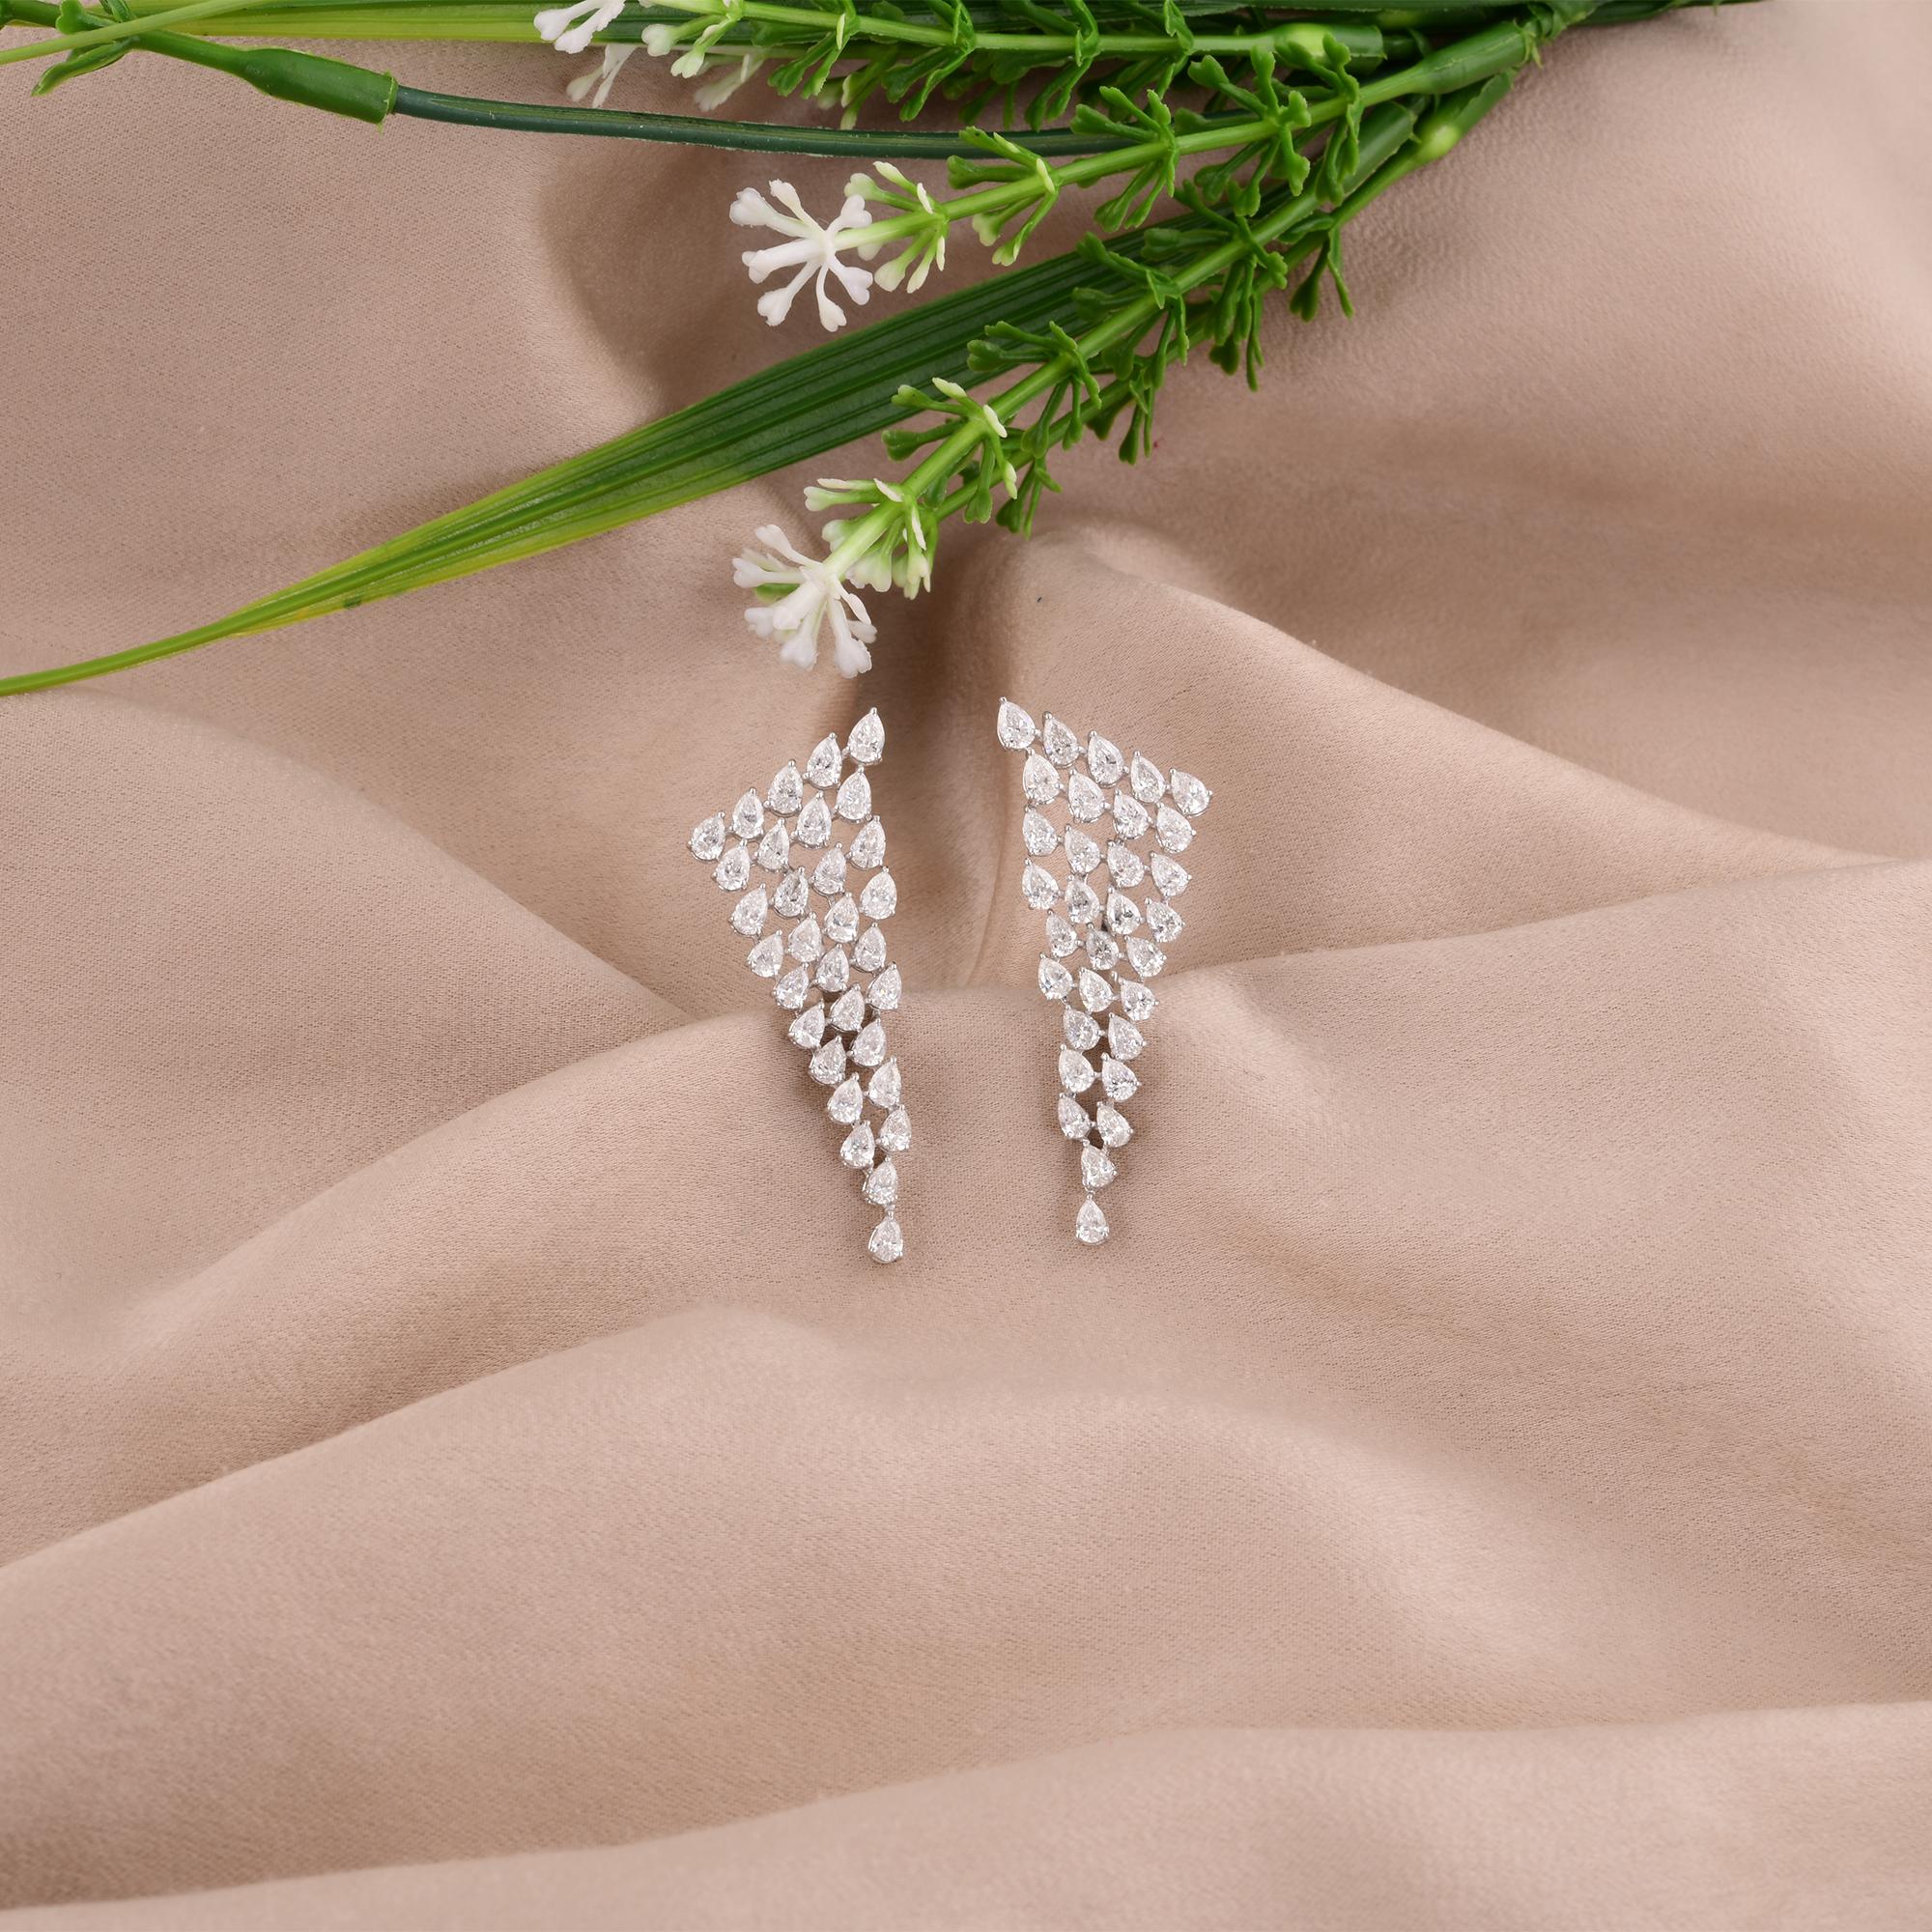 Introducing our  Natural 4.81 Carat Pear Diamond Earrings, a mesmerizing display of luxury and elegance. Meticulously handcrafted from 18 karat white gold, these earrings feature stunning pear-shaped diamonds that exude sophistication and timeless